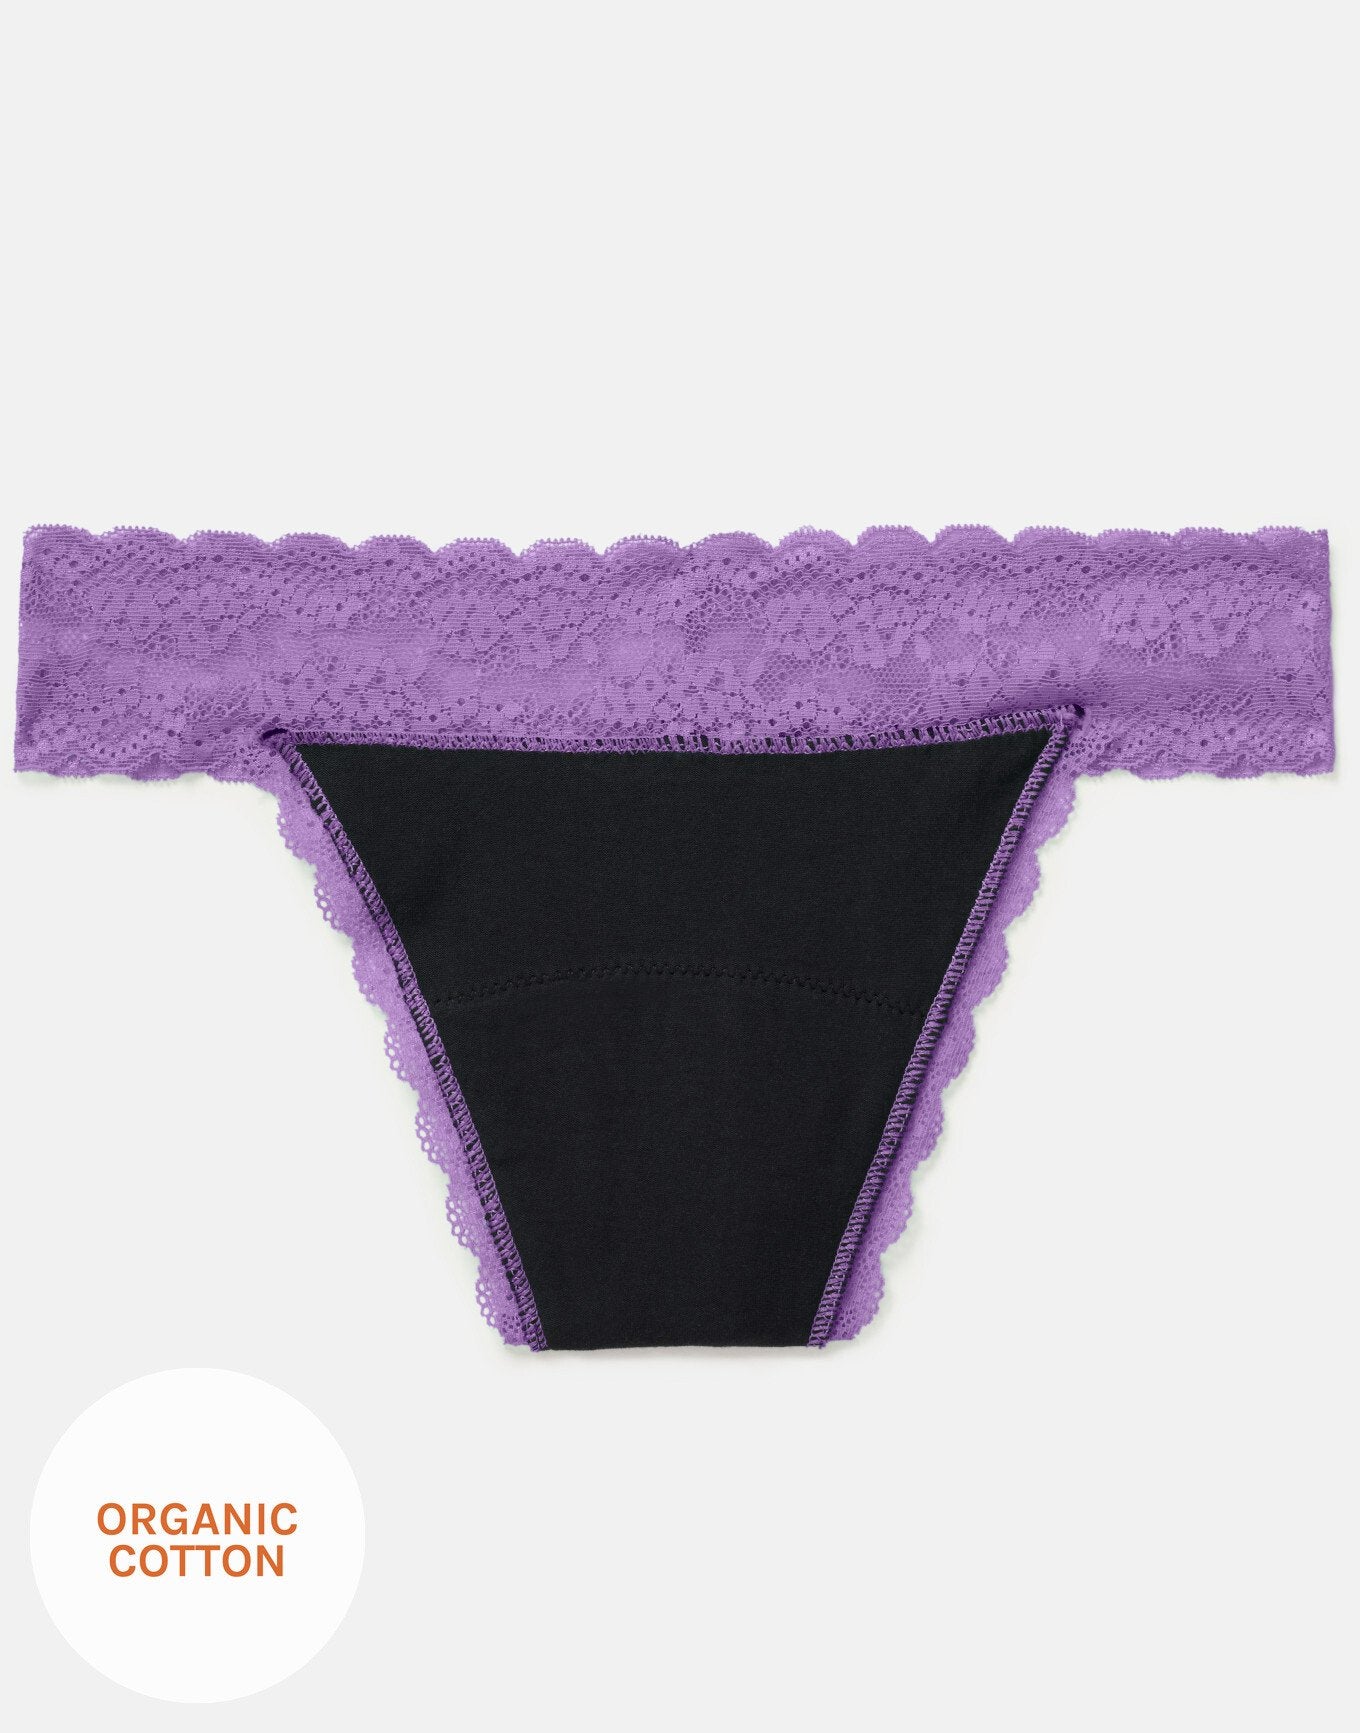 Joyja Lily period-proof panty in color Amethyst Orchid and shape thong